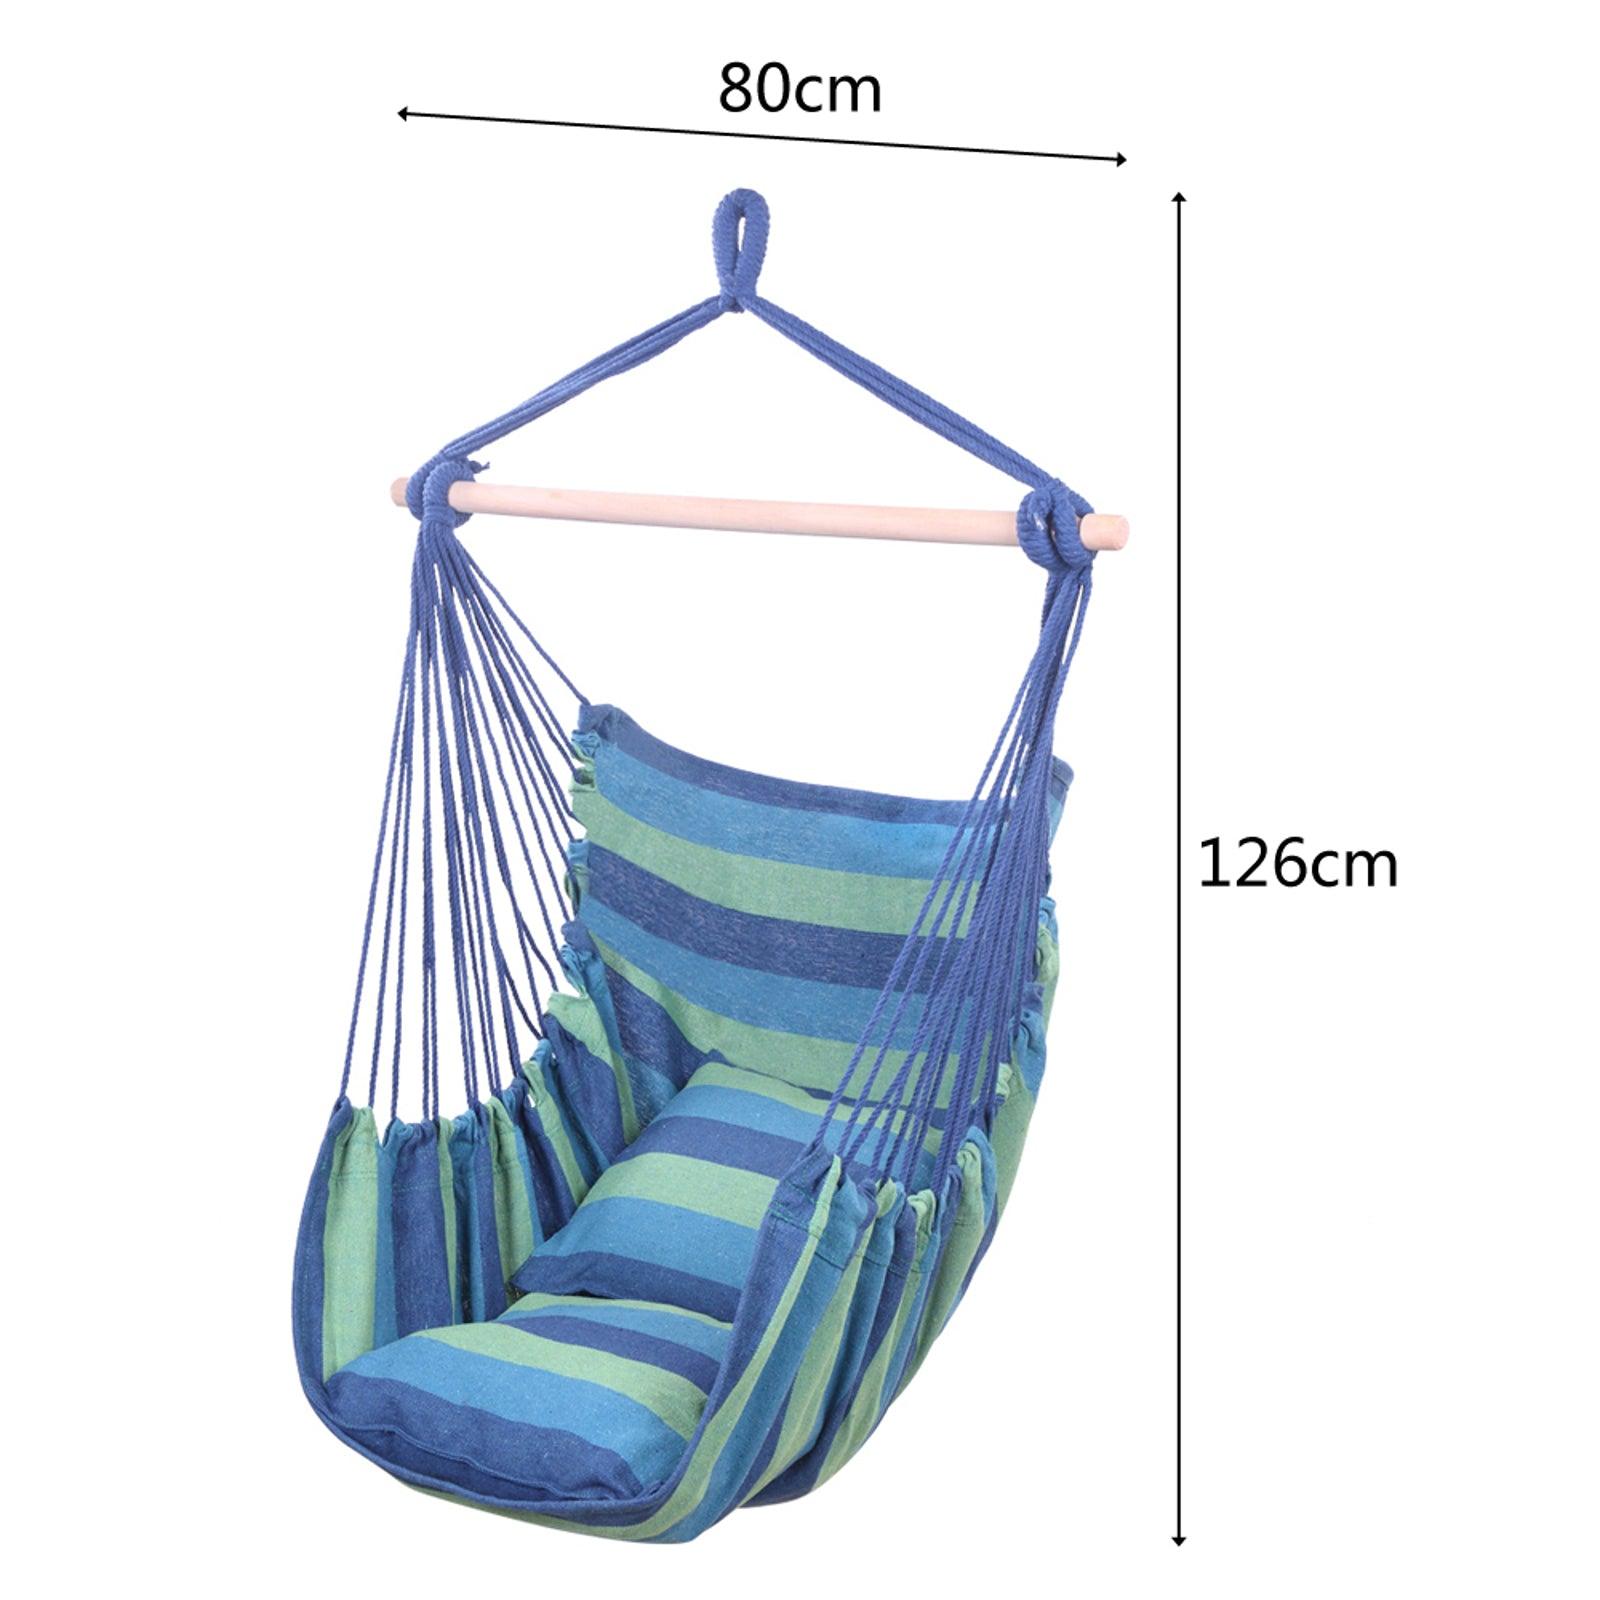 Hanging Chair / Hammock Swing Chair / Canvass Cotton Robe with Pillows (Blue) - Charming Spaces